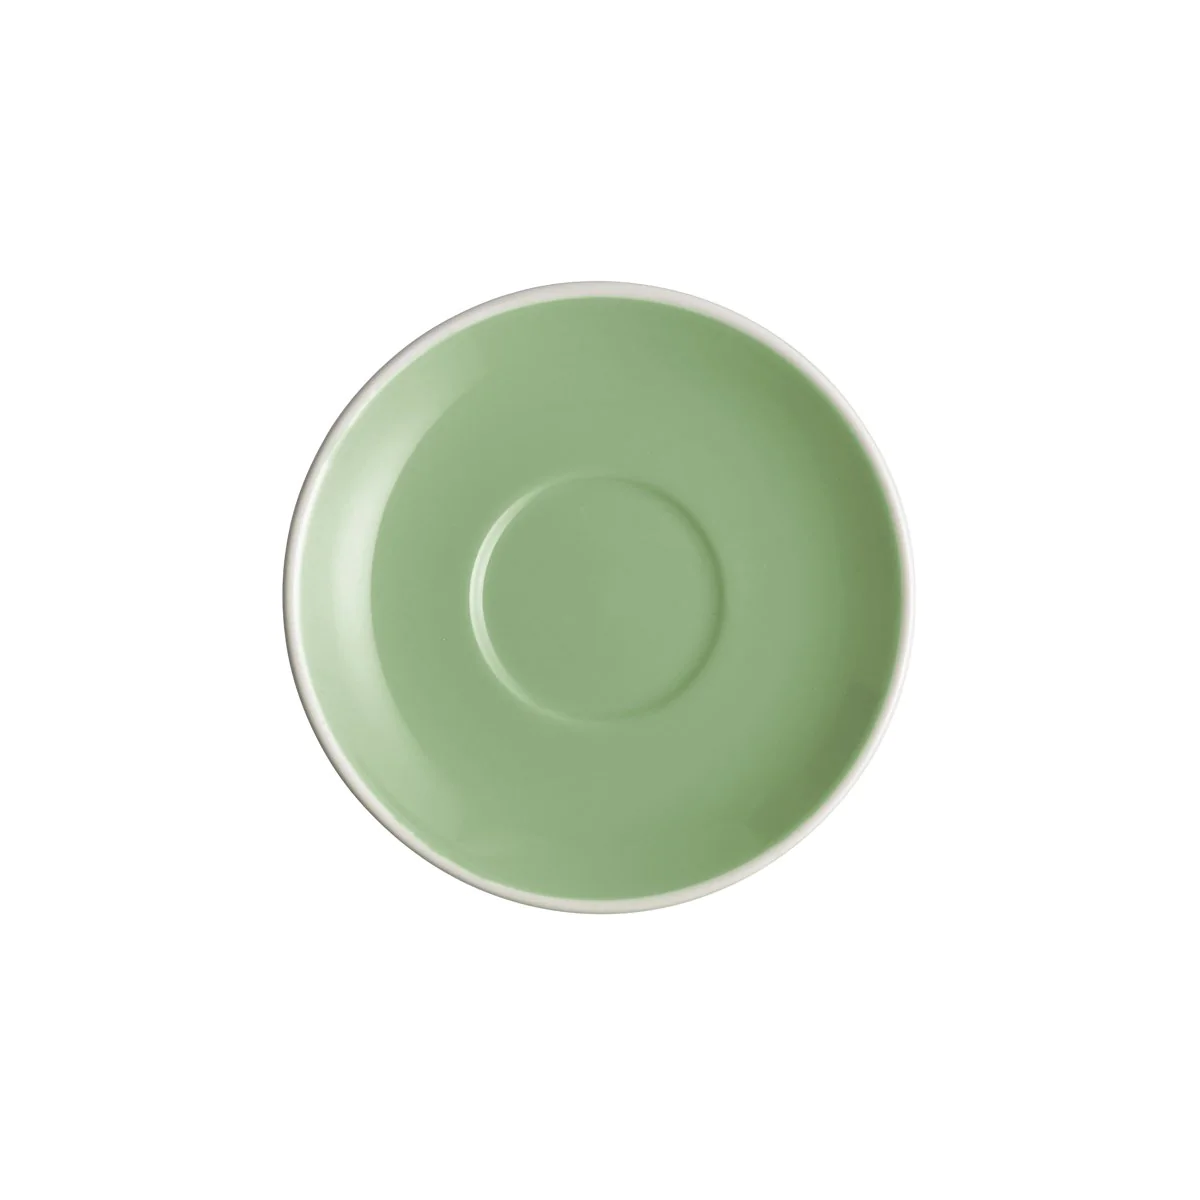 Brew Sage Green Universal Saucer 142mm Pack of 6